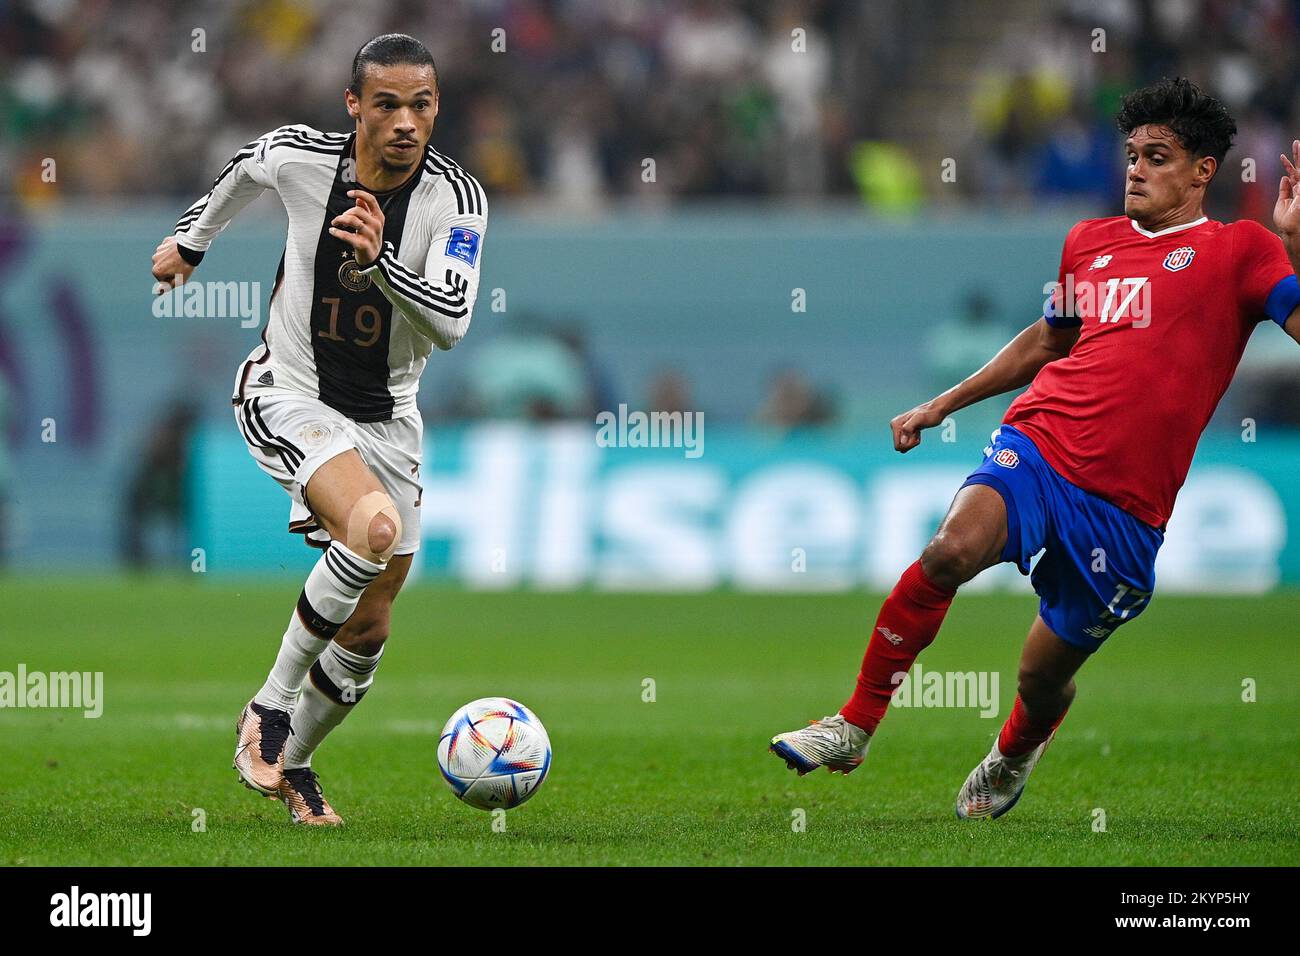 AL KHOR, QATAR - DECEMBER 1: Leroy Sane of Germany battles for the ball with Yeltsin Tejeda of Costa Rica during the Group E - FIFA World Cup Qatar 2022 match between Costa Rica and Germany at the Al Bayt Stadium on December 1, 2022 in Al Khor, Qatar (Photo by Pablo Morano/BSR Agency) Stock Photo